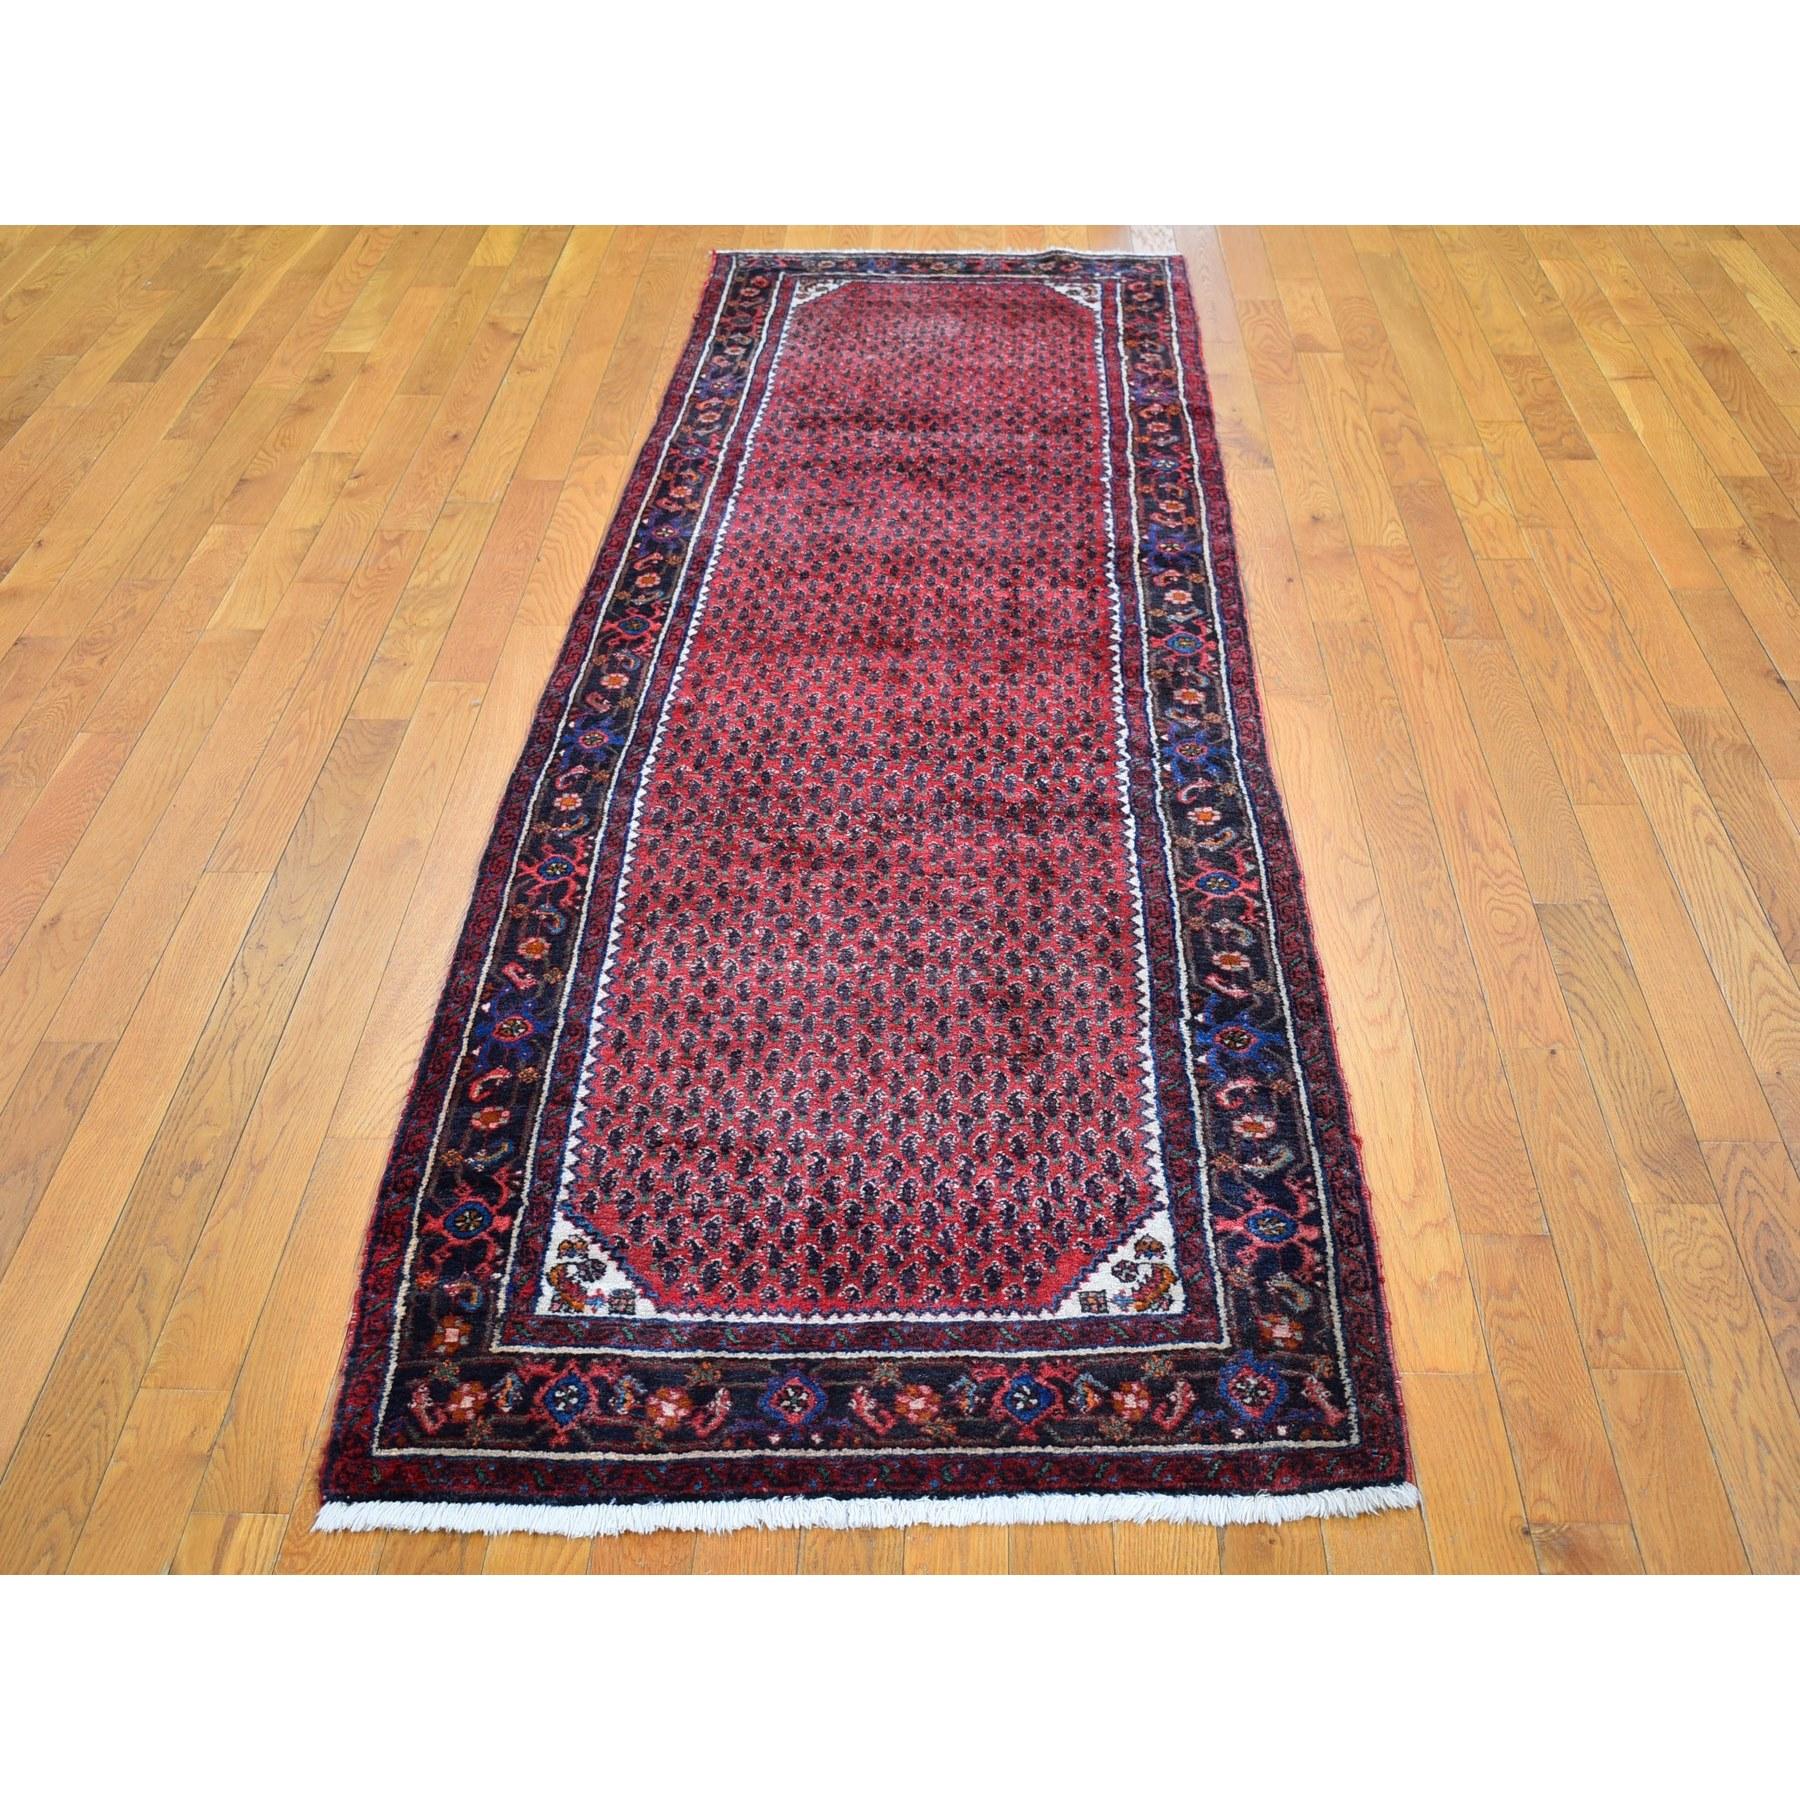 This fabulous hand-knotted carpet has been created and designed for extra strength and durability. This rug has been handcrafted for weeks in the traditional method that is used to make
Exact rug size in feet and inches : 3'0